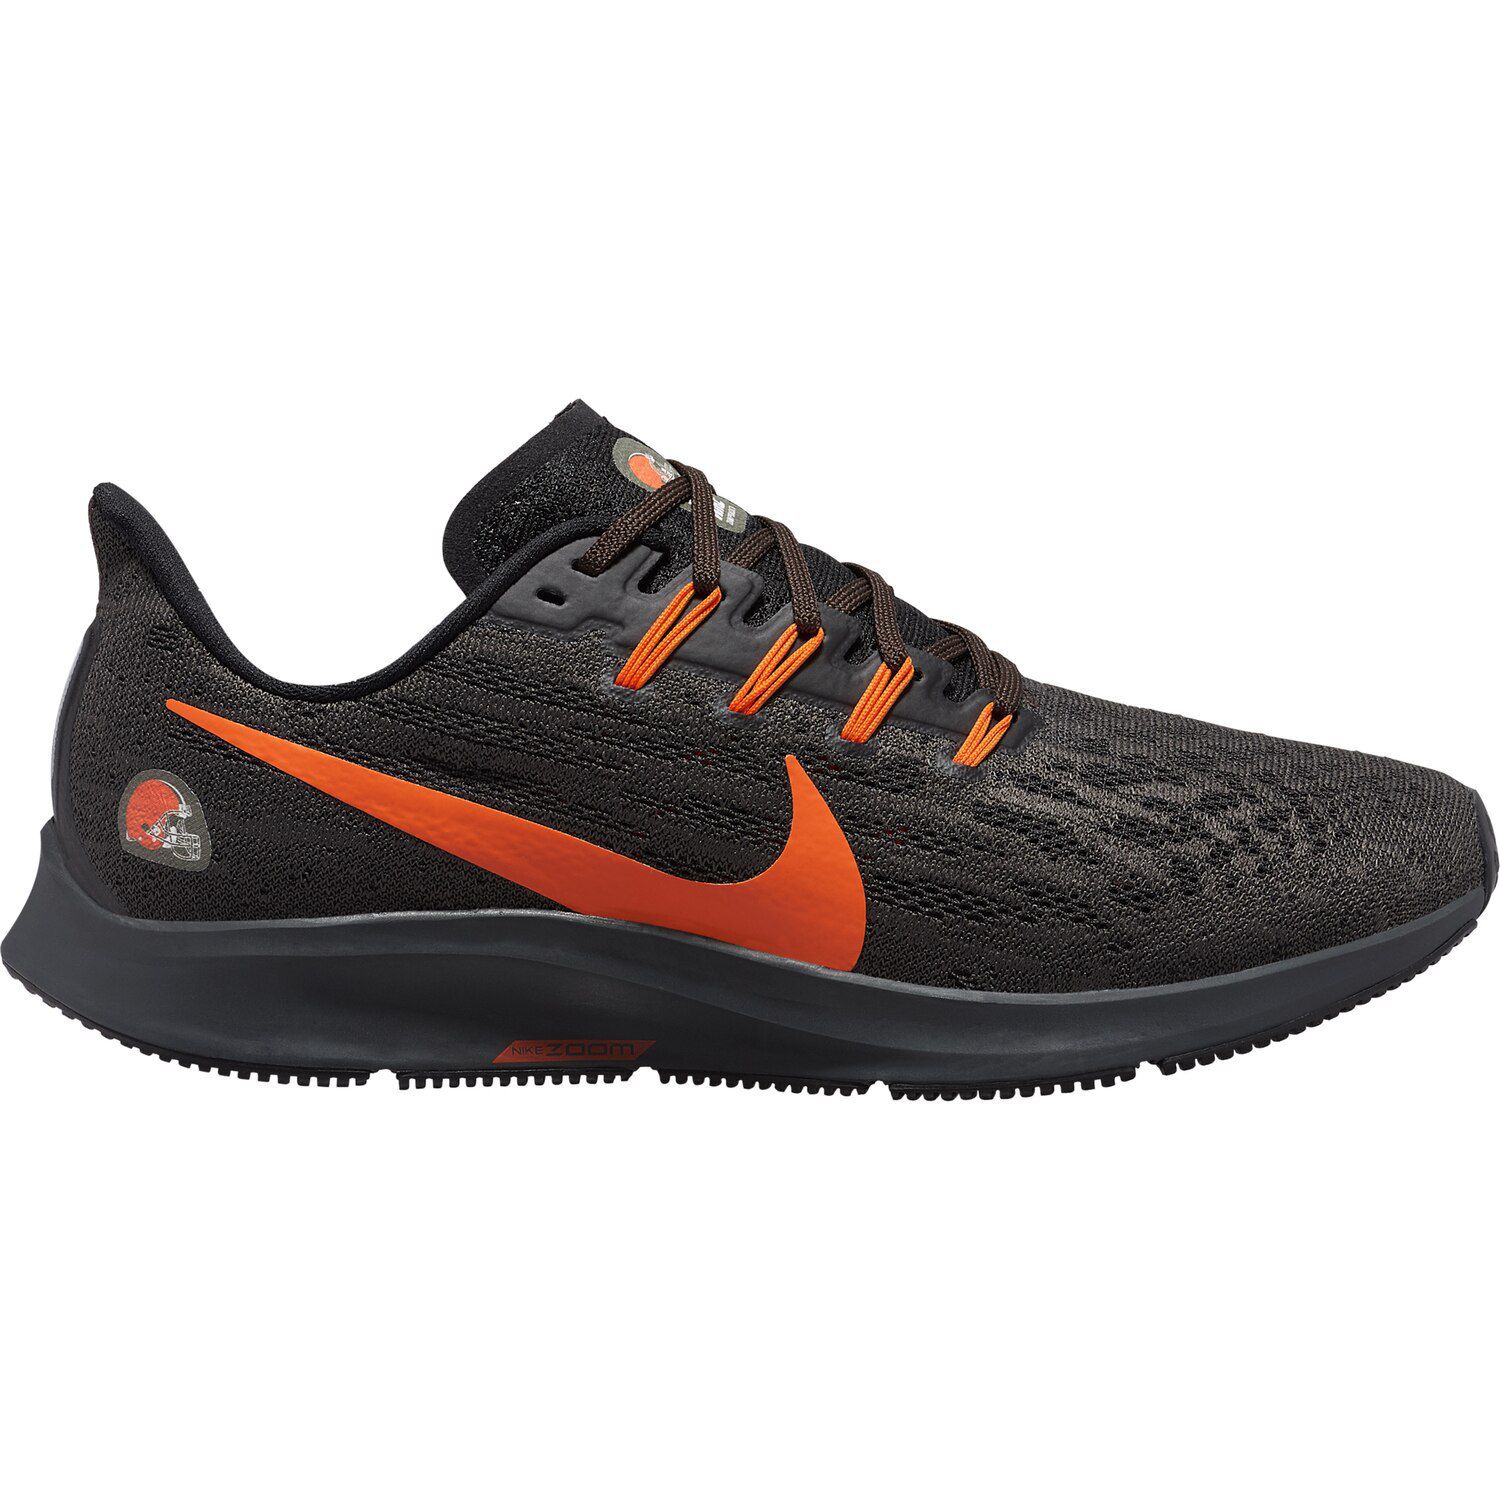 cleveland browns nike tennis shoes